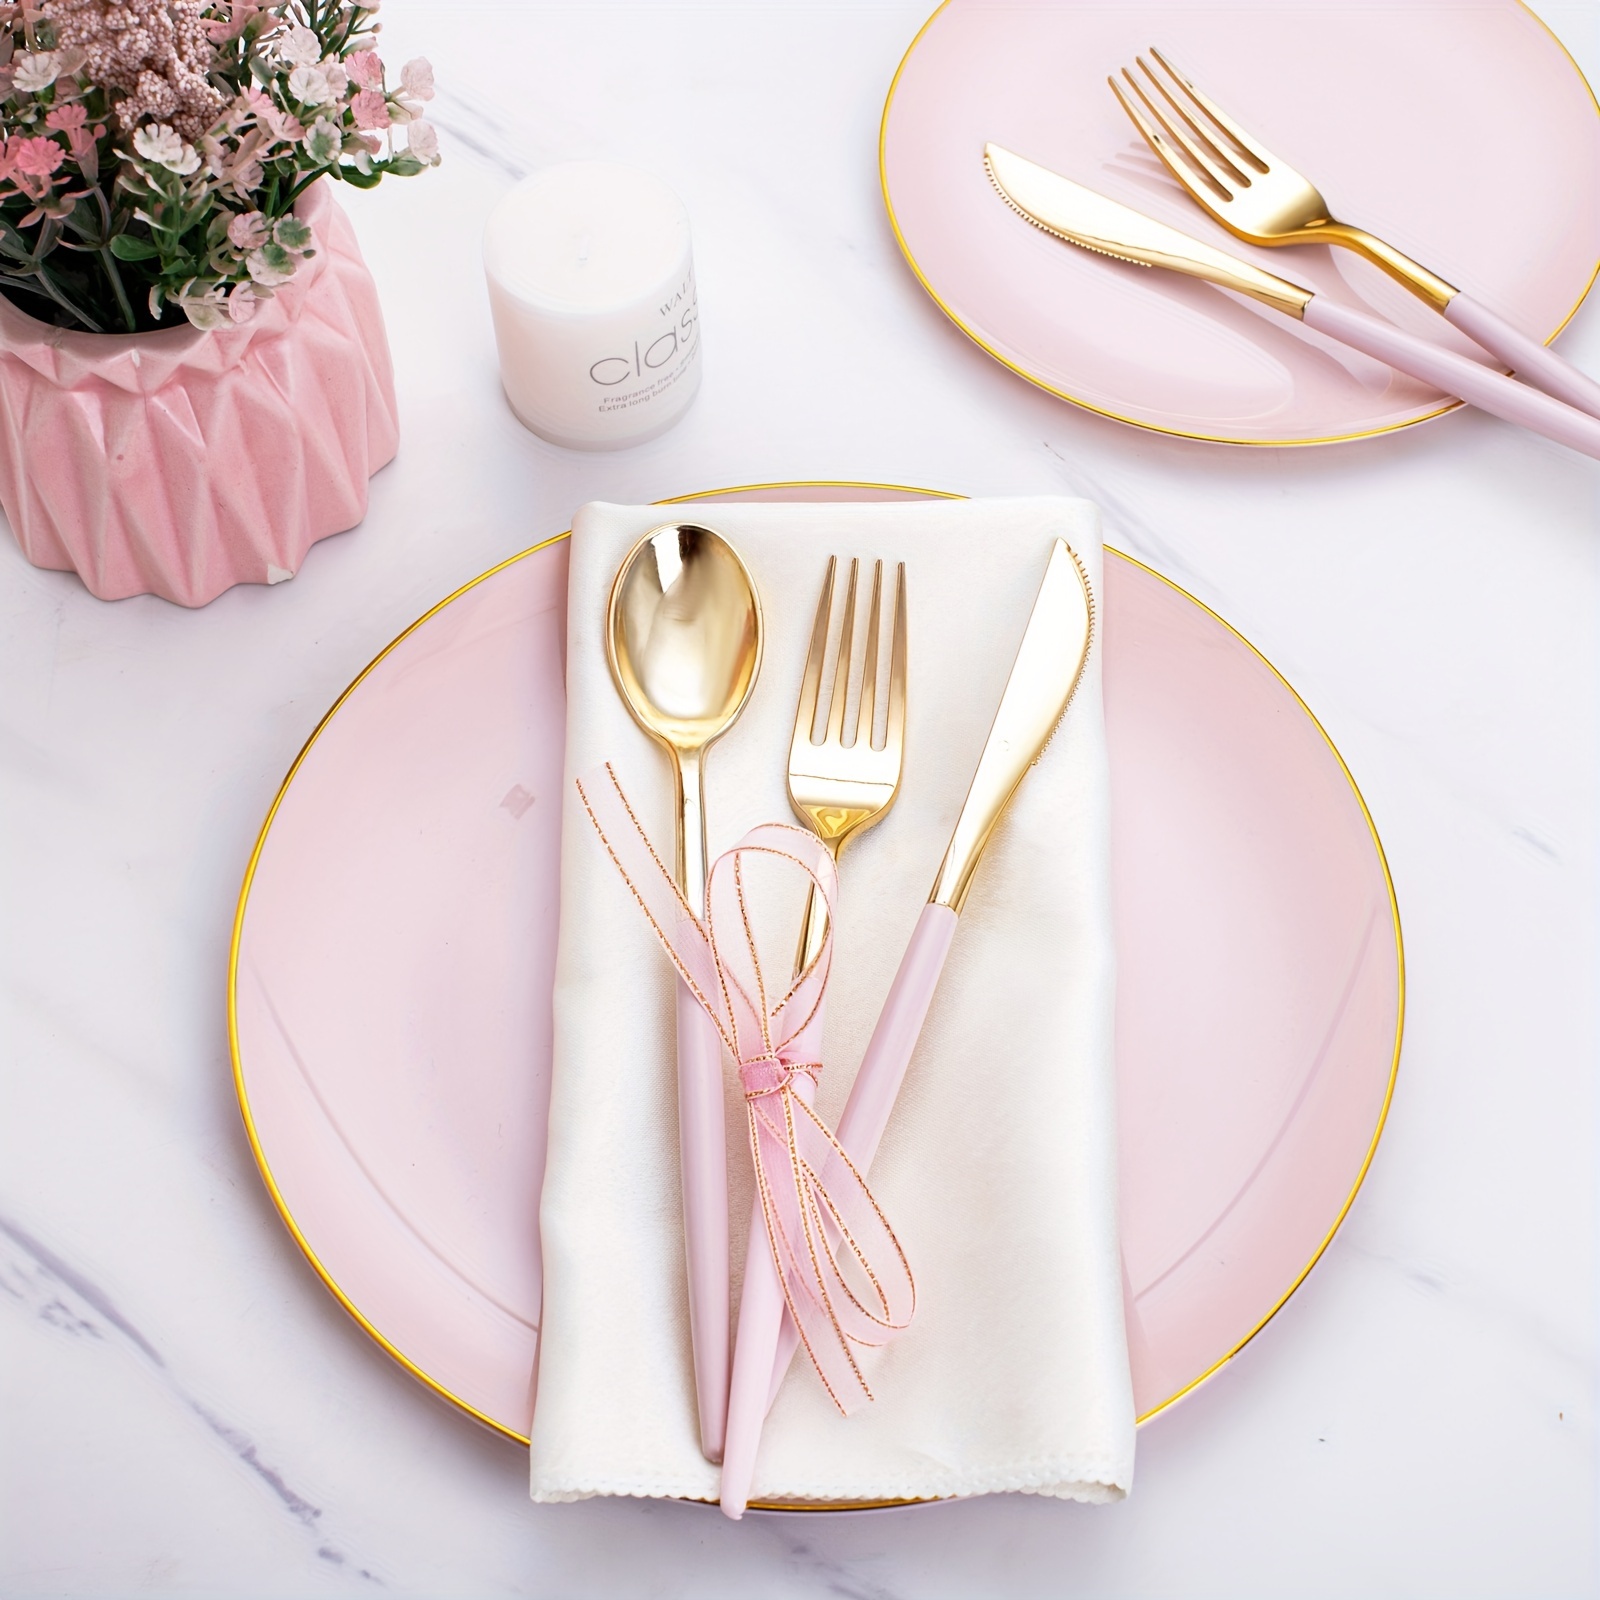 Woman in Real Life: Valentine's Day Pink and Gold Table Decor with Gold  Flatware